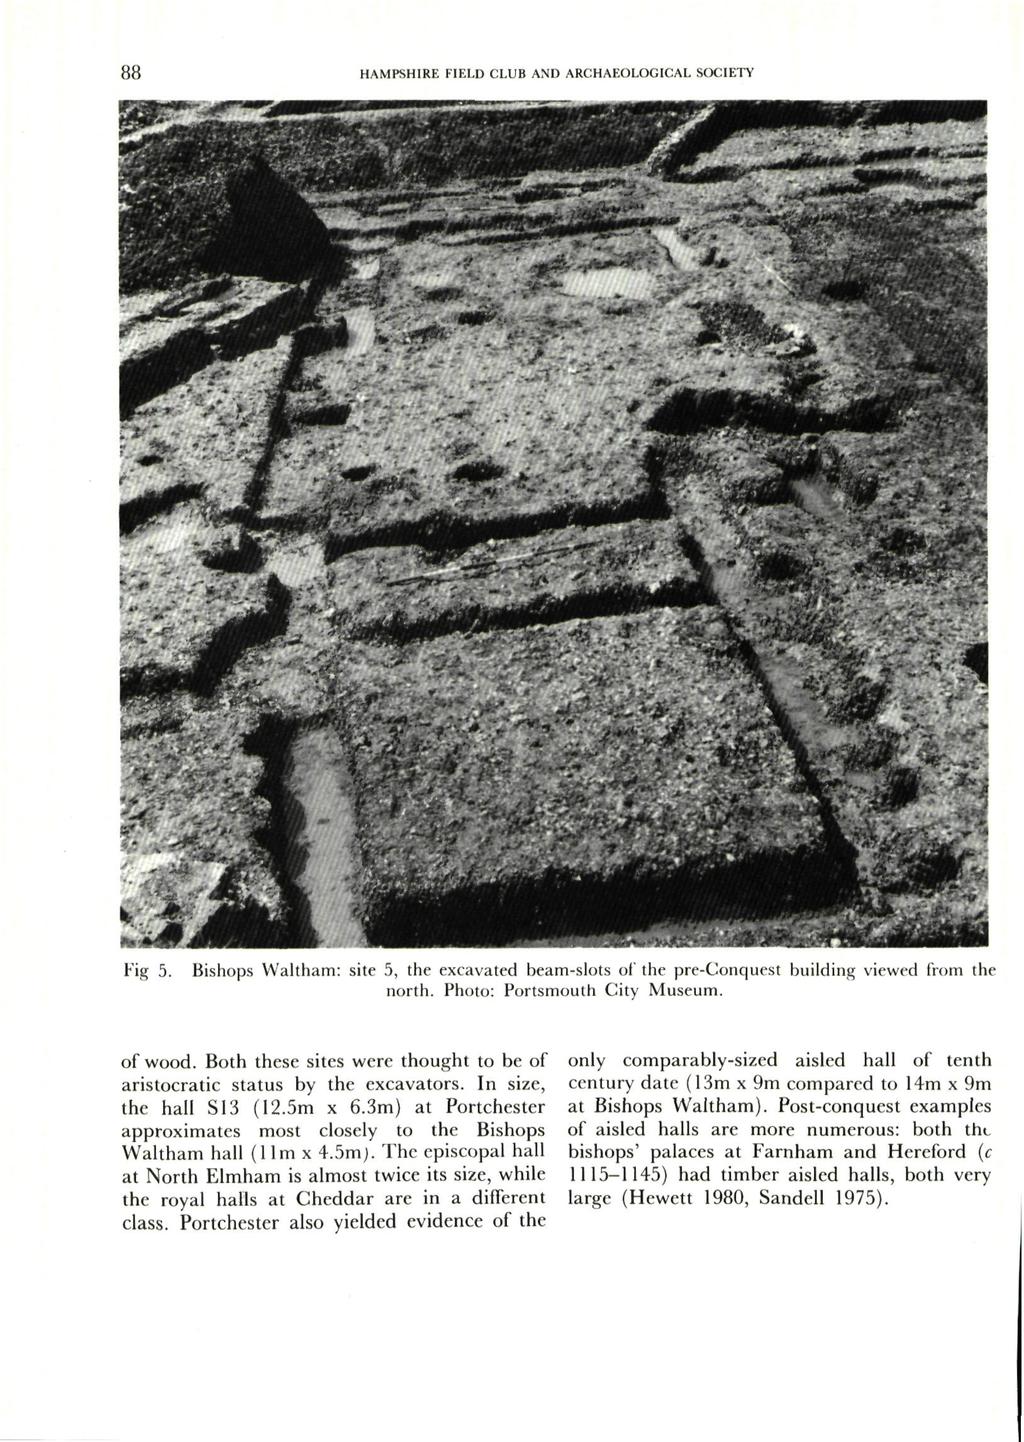 88 HAMPSHIRE FIELD CLUB AND ARCHAEOLOGICAL SOCIETY Fig 5. Bishops Waltham: site 5, the excavated beam-slots of" the pre-conquest building viewed from the north. Photo: Portsmouth City Museum. of wood.